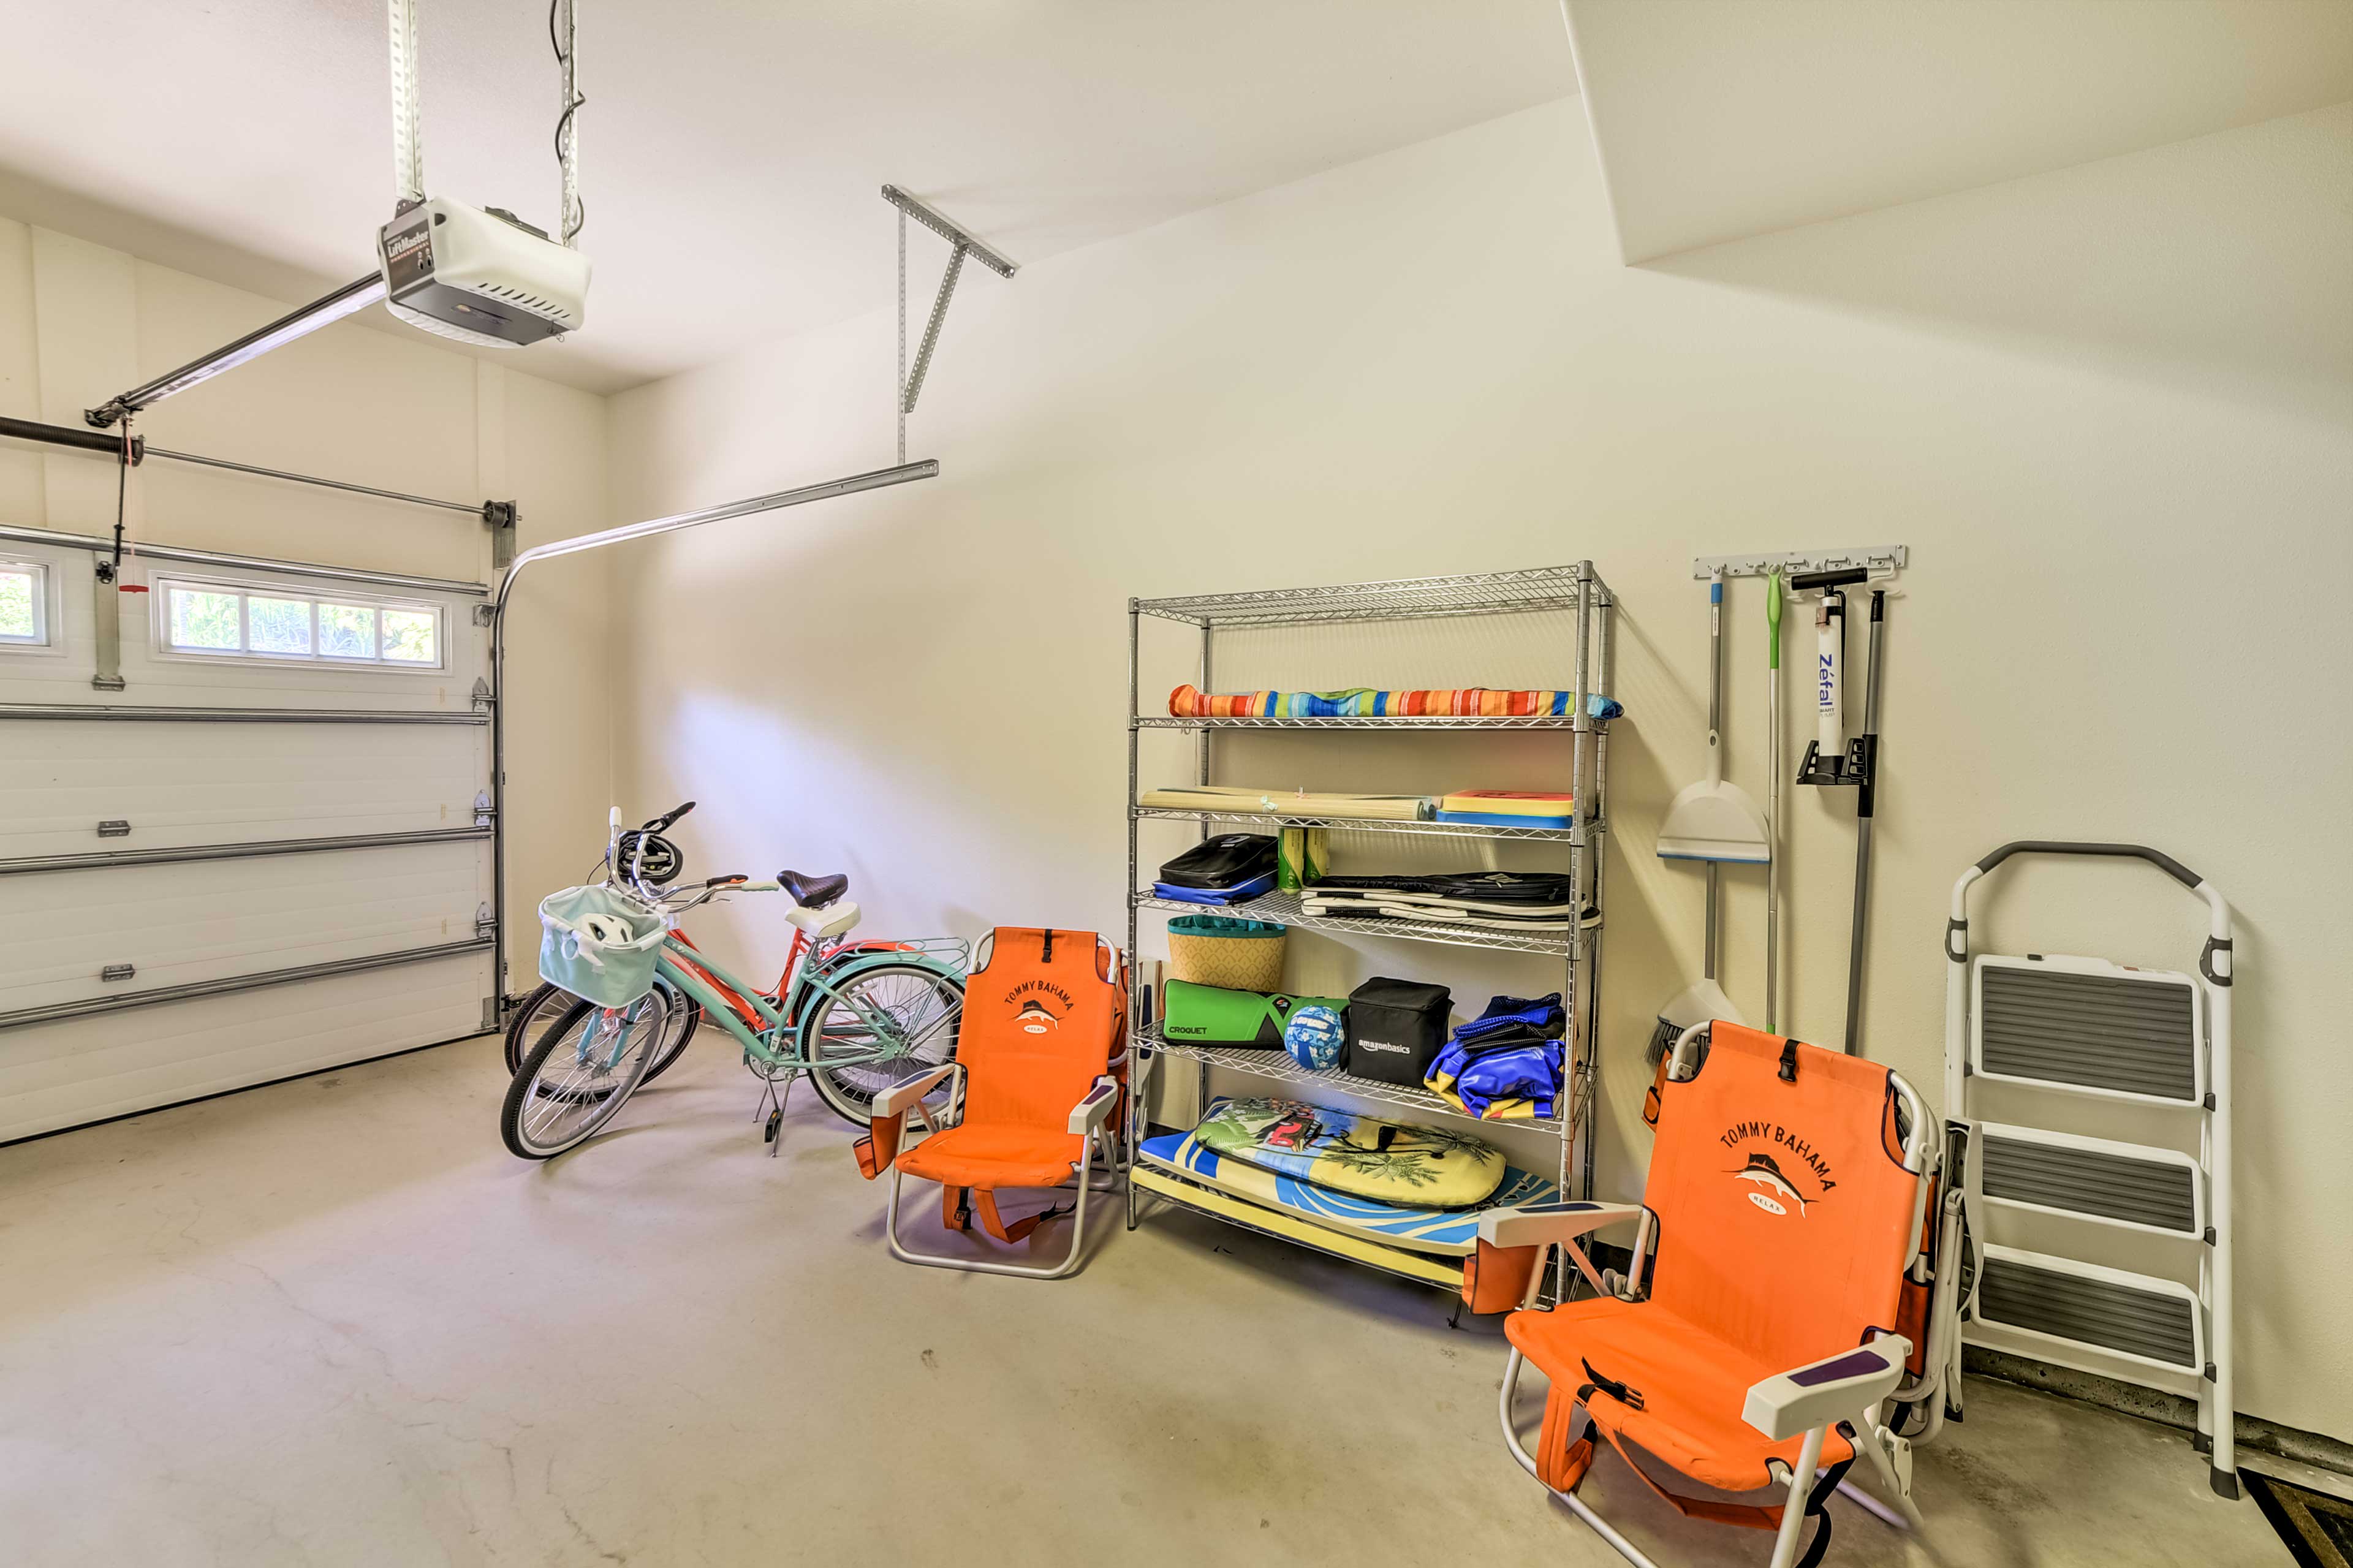 Garage Parking | 1 Vehicle | Beach Toys Provided